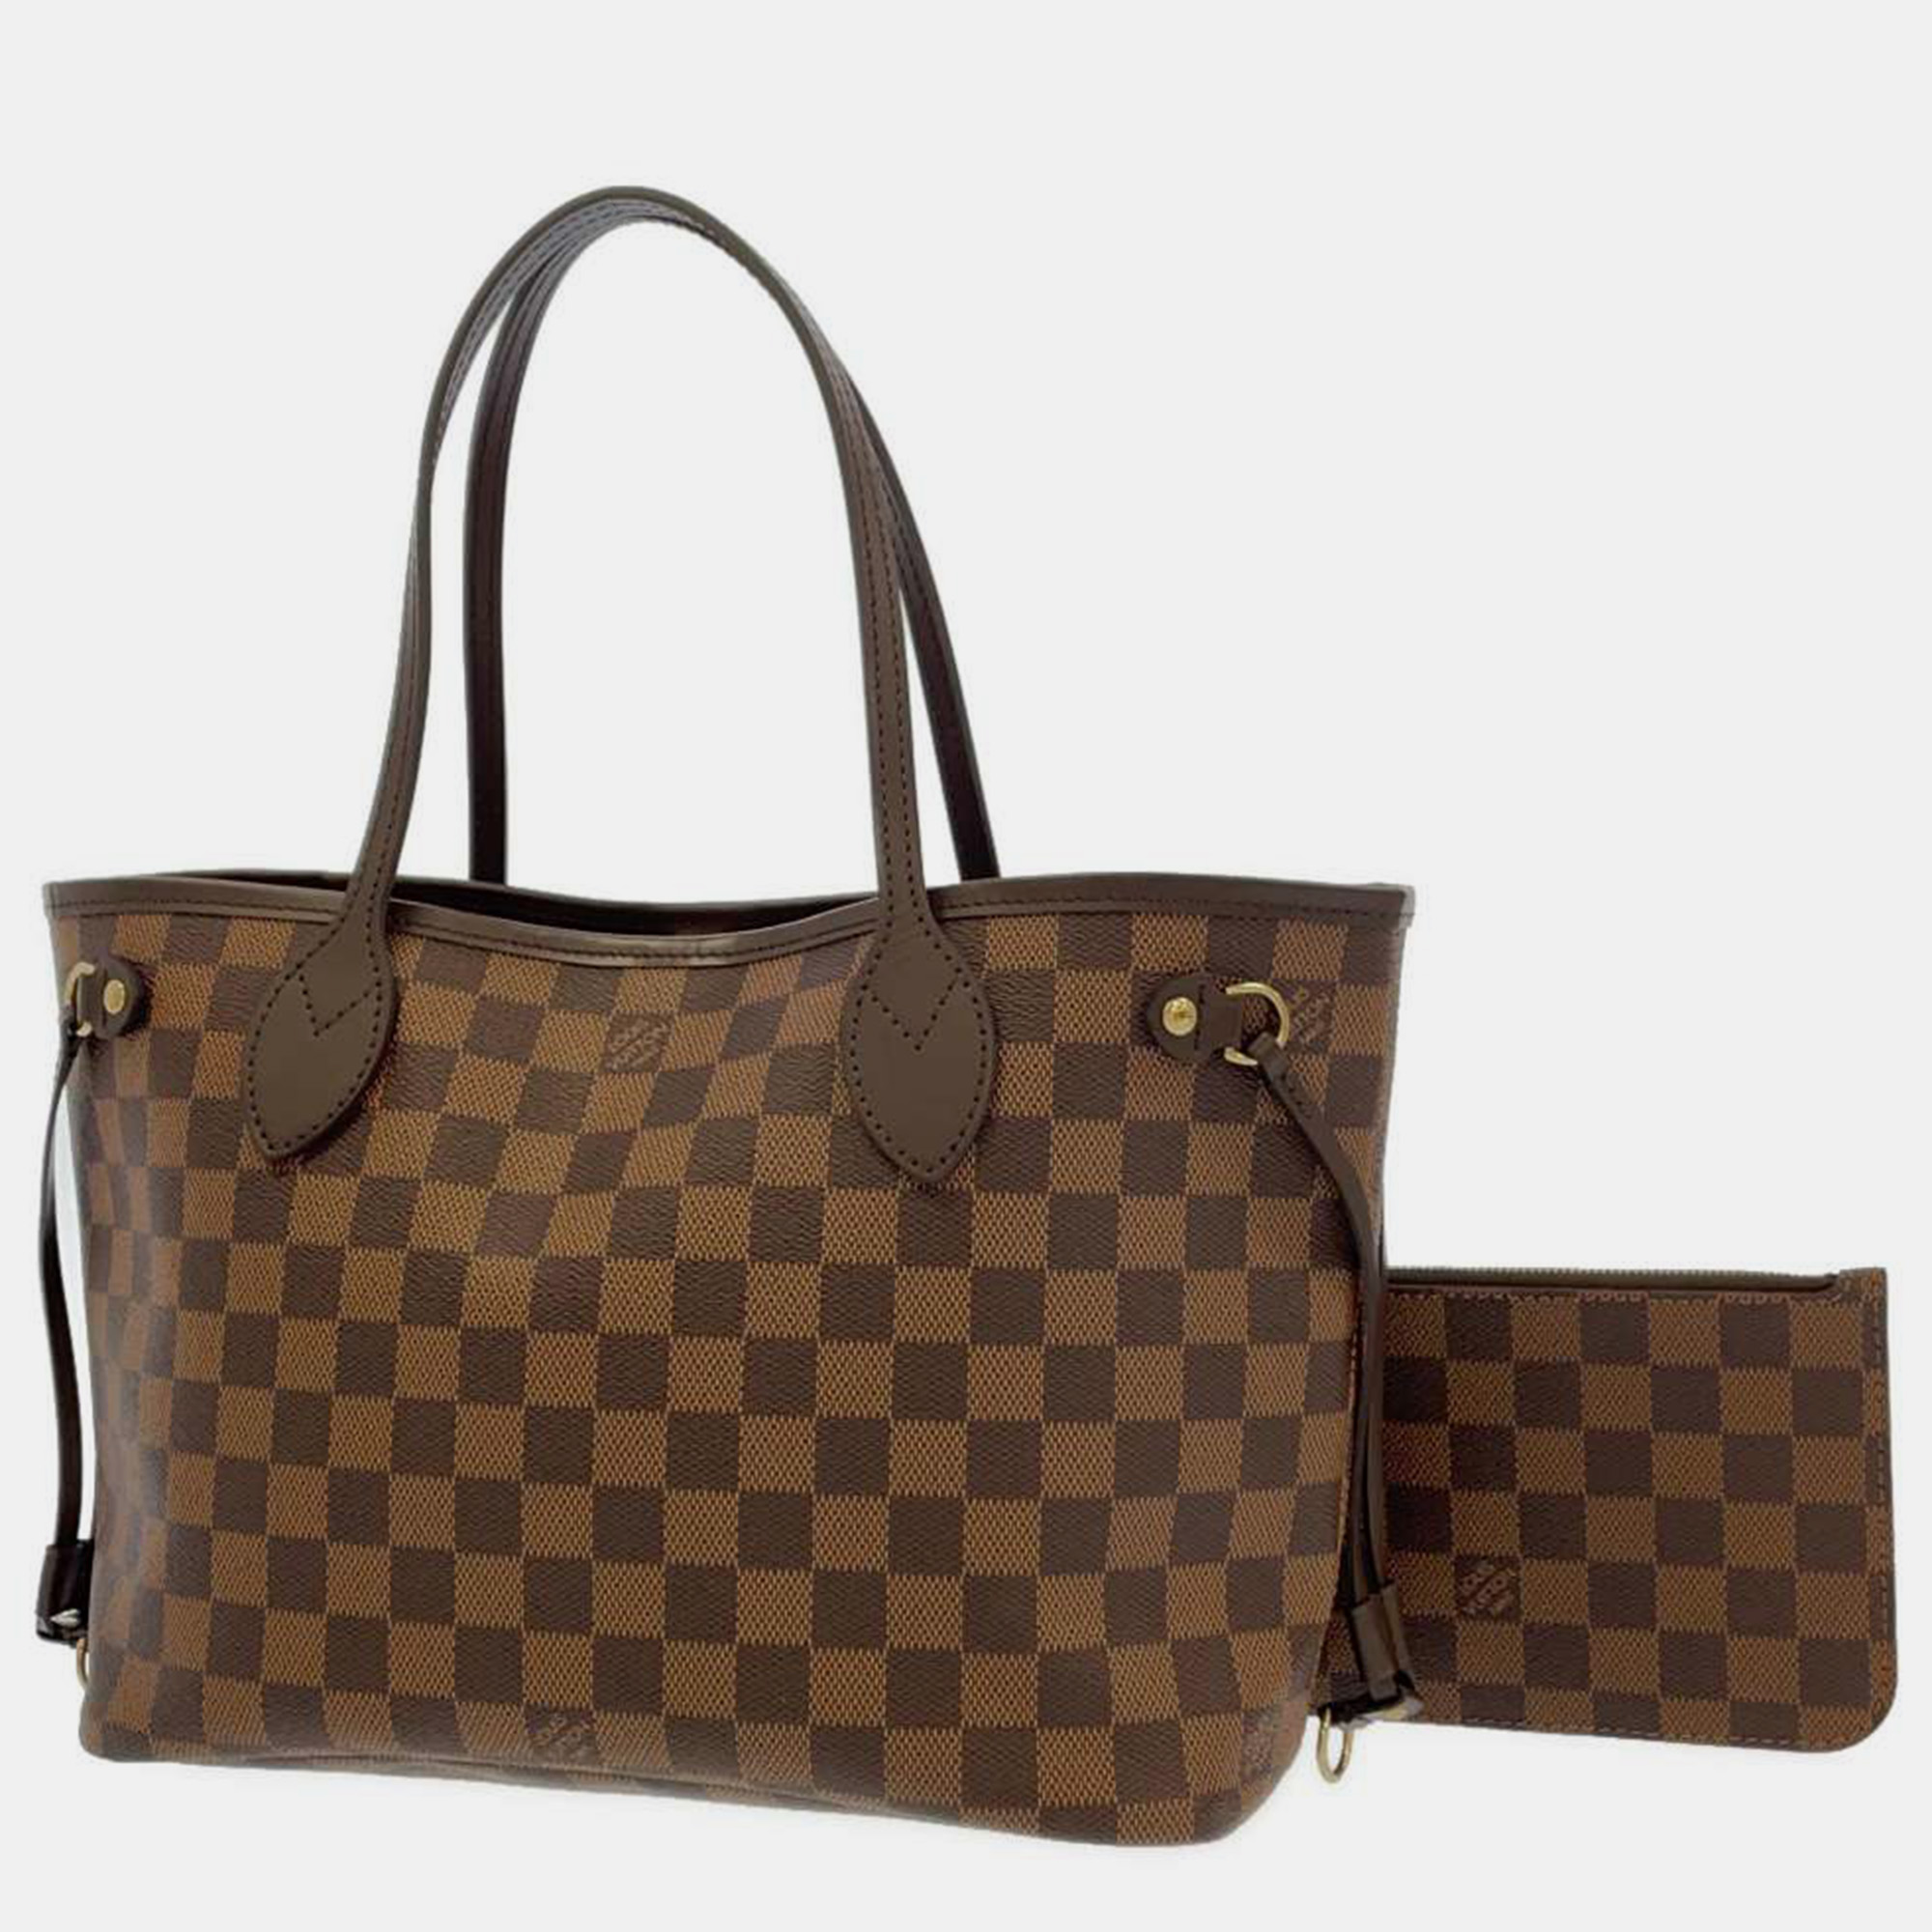 

LOUIS VUITTON Damier Ebene Canvas Neverfull Size PM Tote, Brown